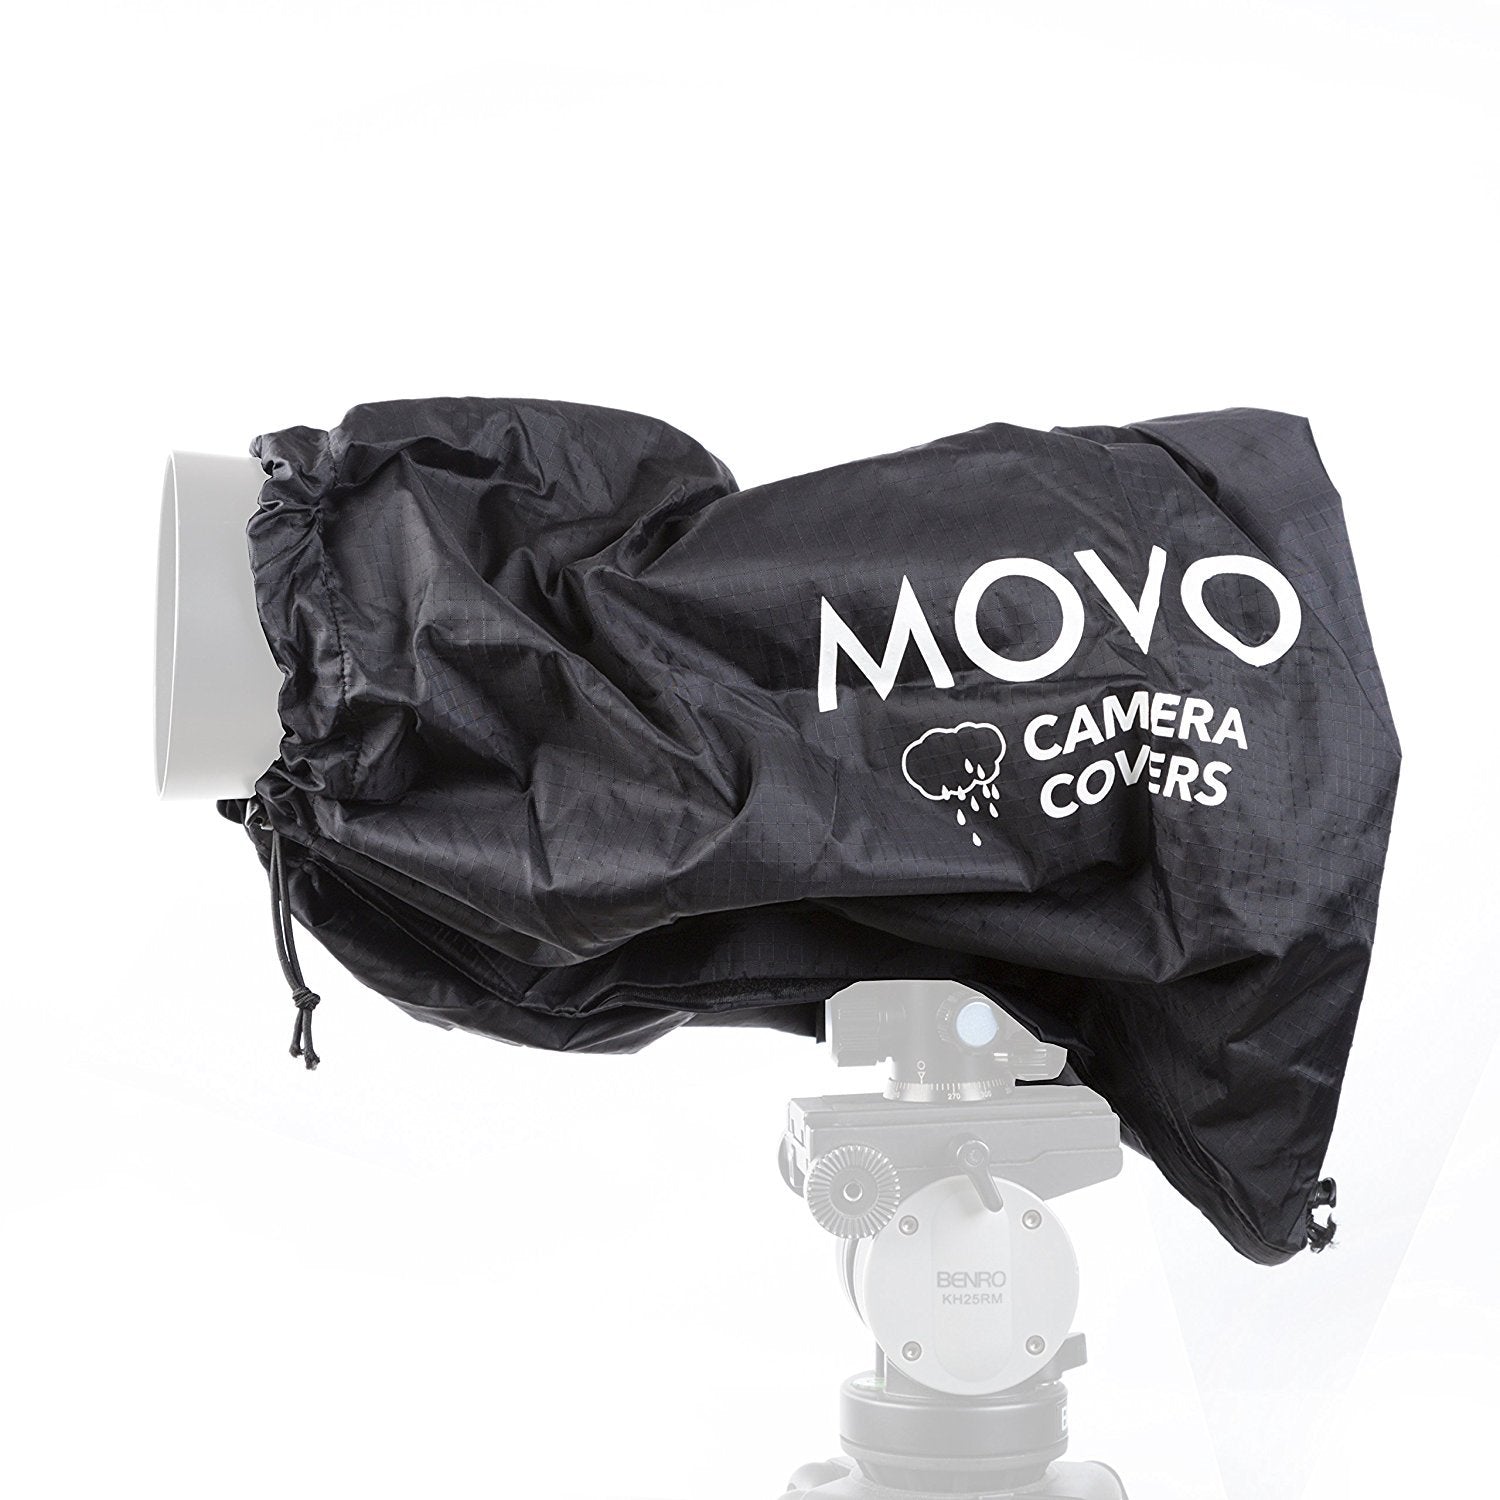 Movo CRC17 Storm Raincover Protector for DSLR Cameras, Lenses, Photographic Equipment (Small Size: 17 x 14.5)  - Like New